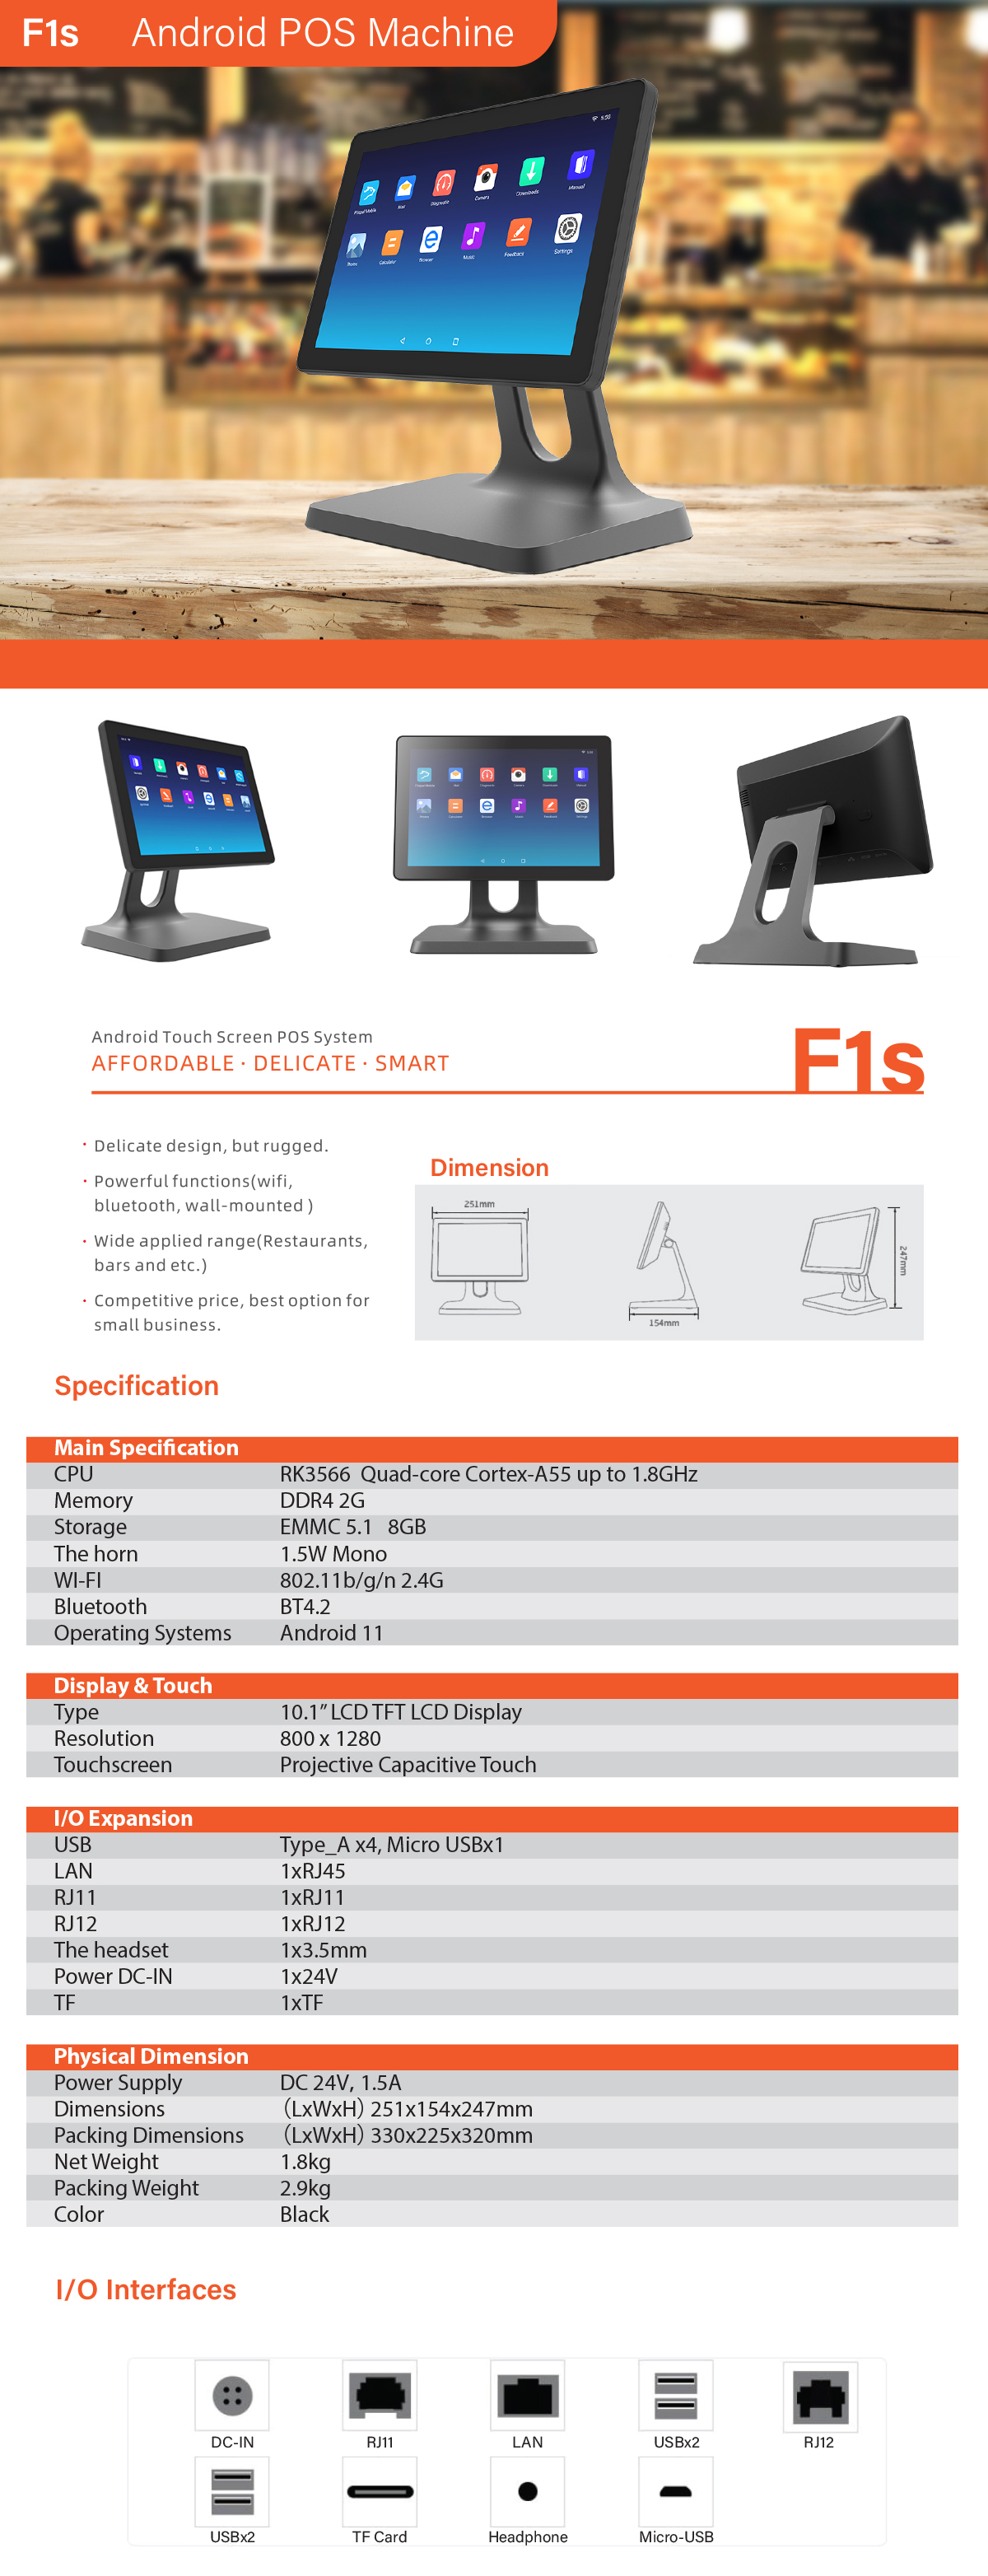 F1s Android POS Machine